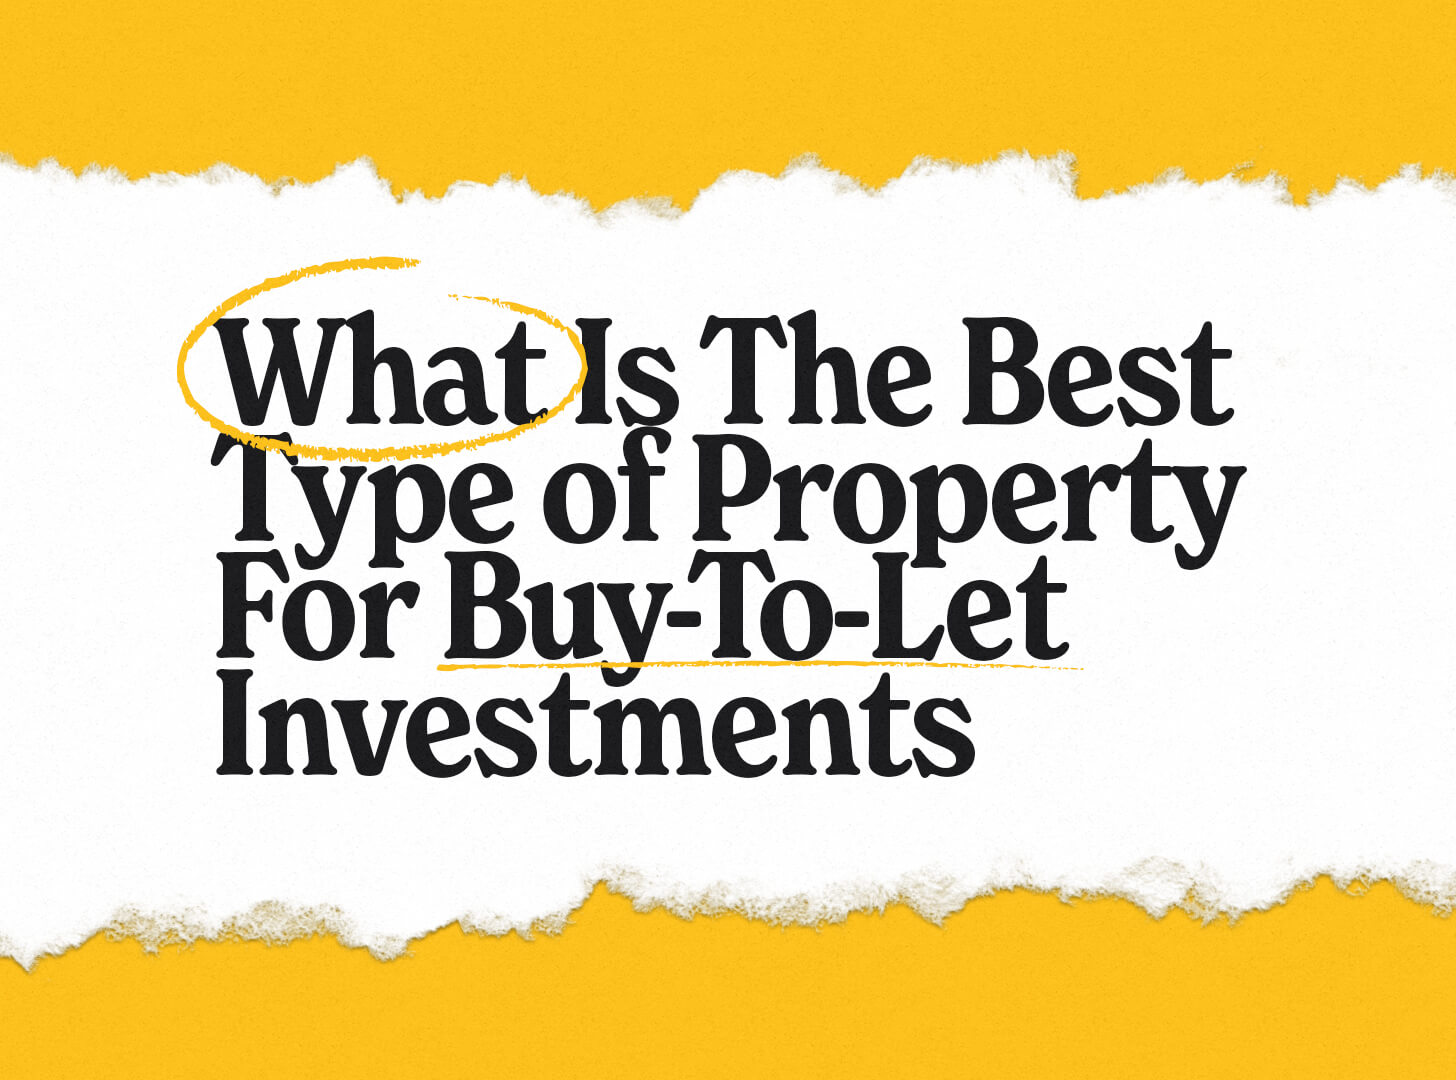 What is the Best Type of Property for Buy-to-Let Investments?